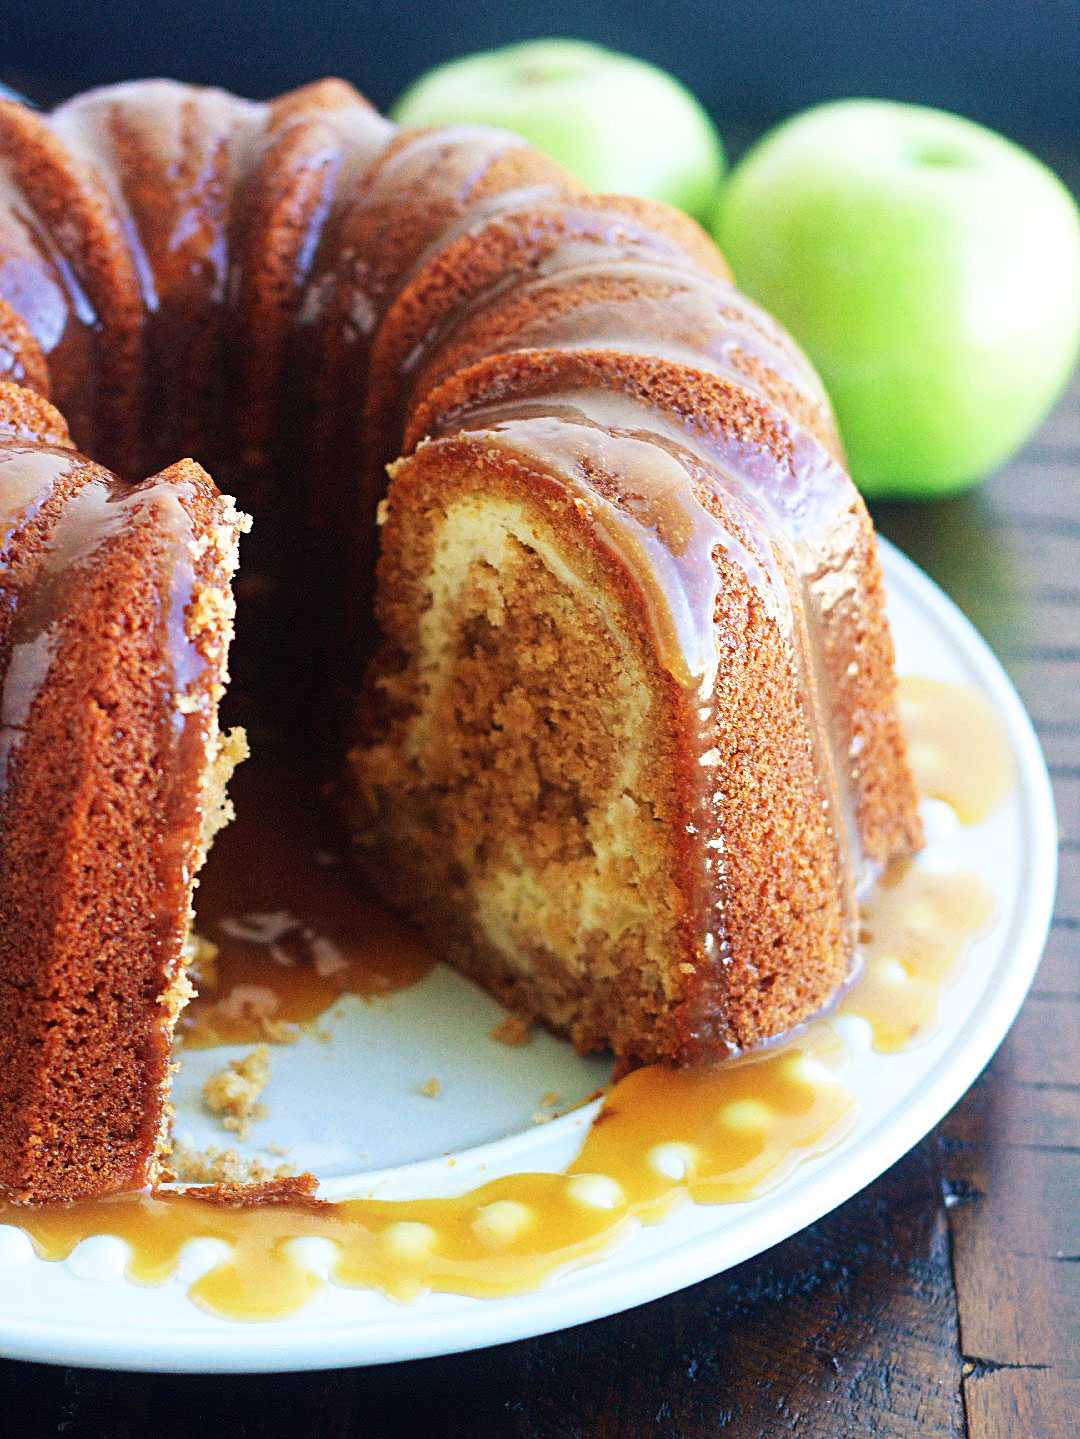 Apple Bundt cake with Cream Cheese Swirl is a moist, delicious apple bundt cake filled with cream cheese and topped with a caramel sauce. Life-in-the-Lofthouse.com